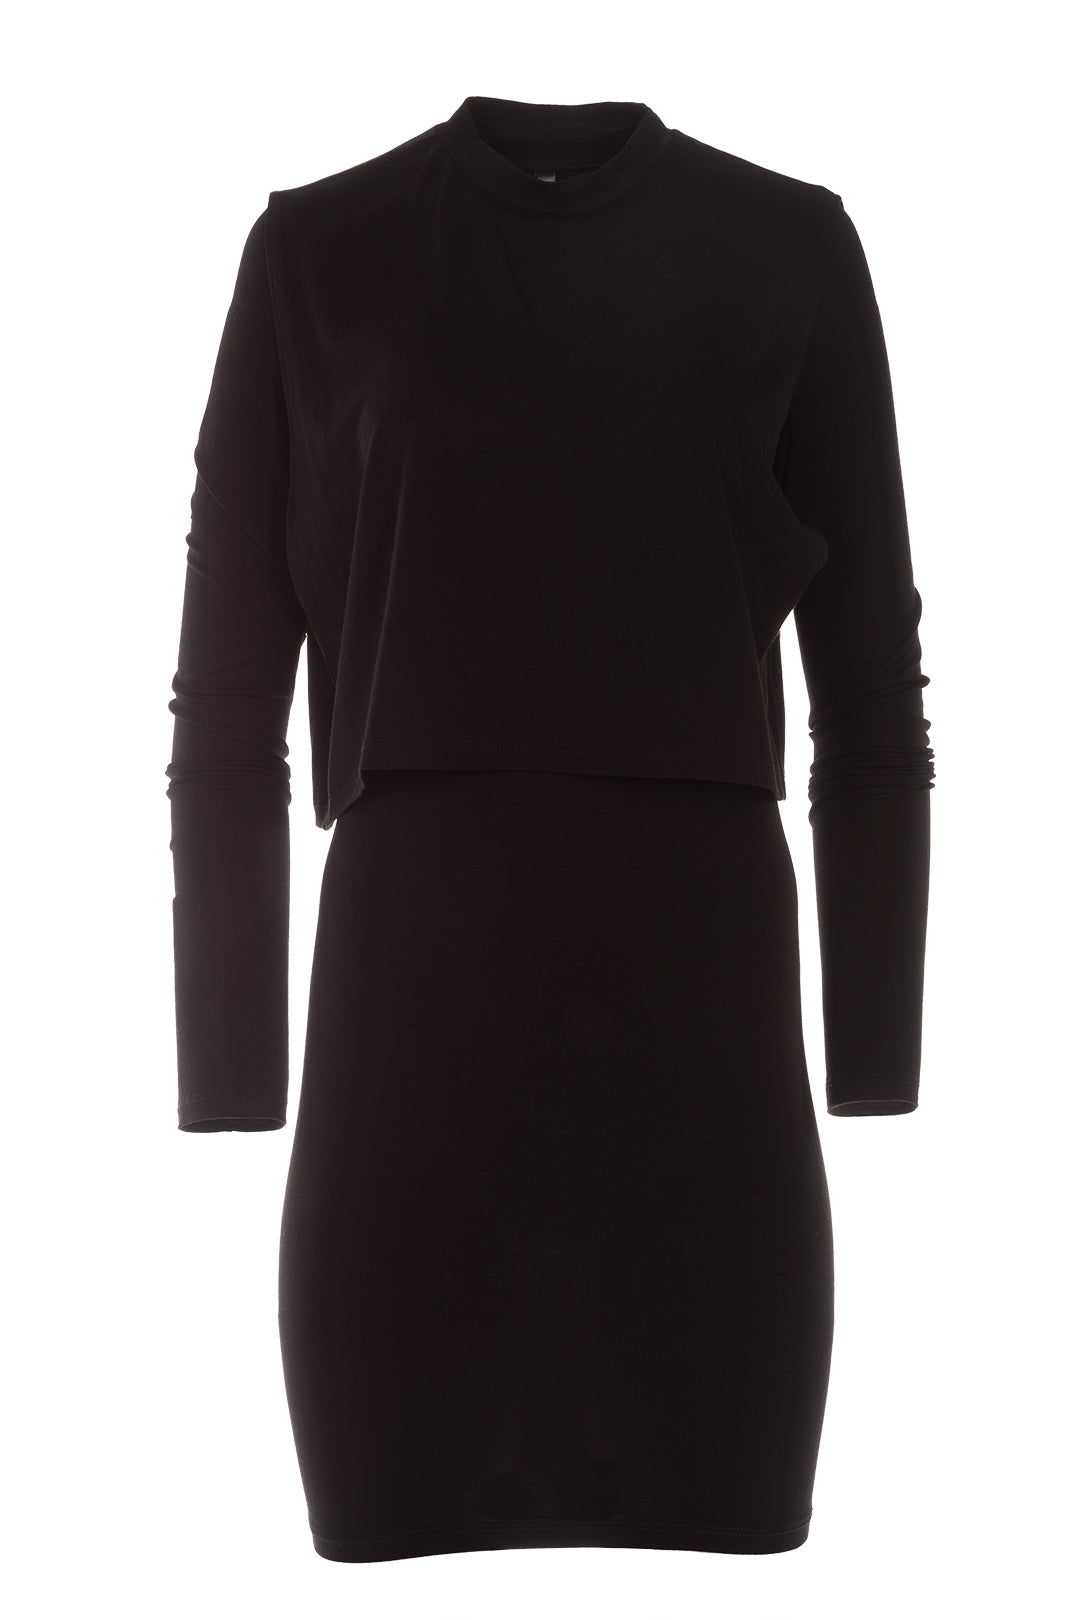 Fitted black dress | Hilo